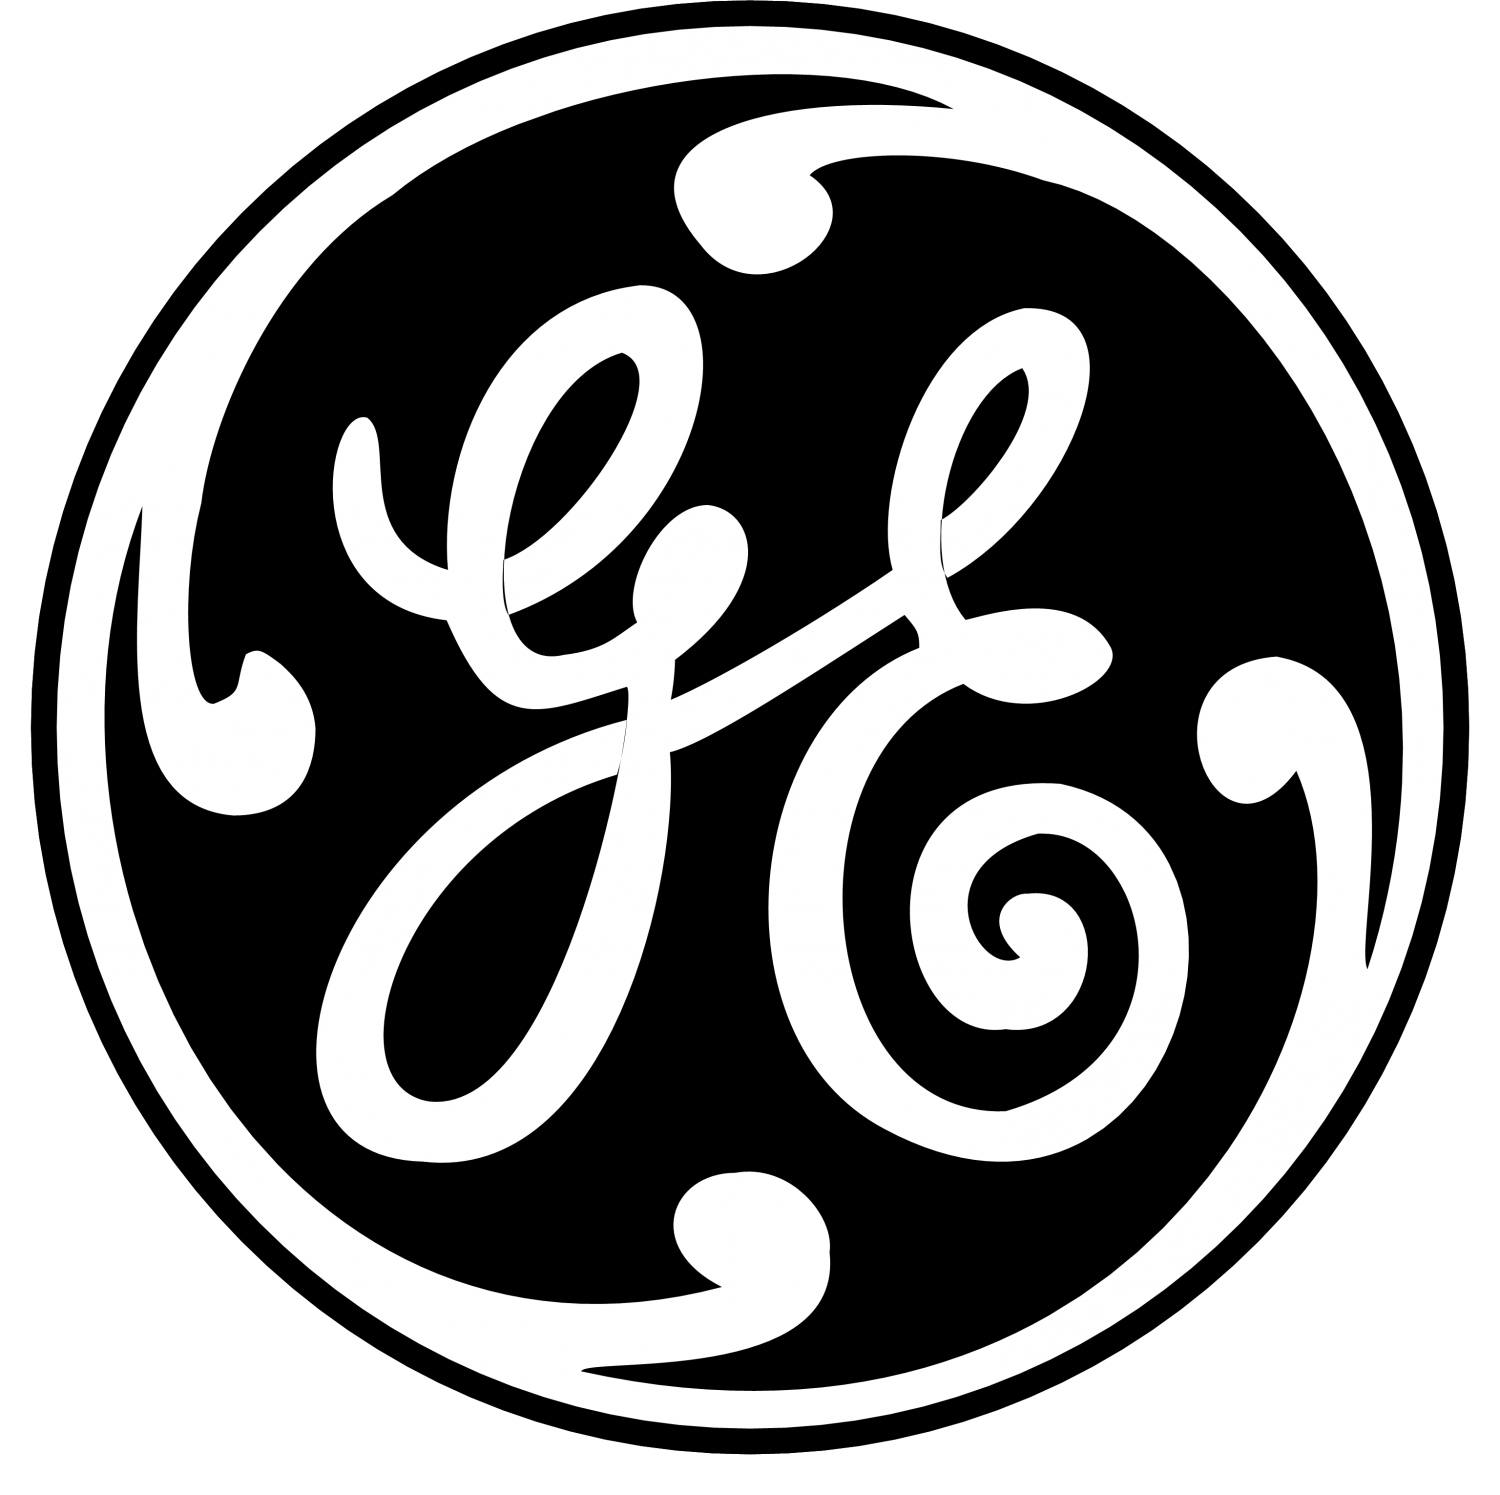 Small General Electric Logo - Wolong Acquires GE's Small Industrial Motors